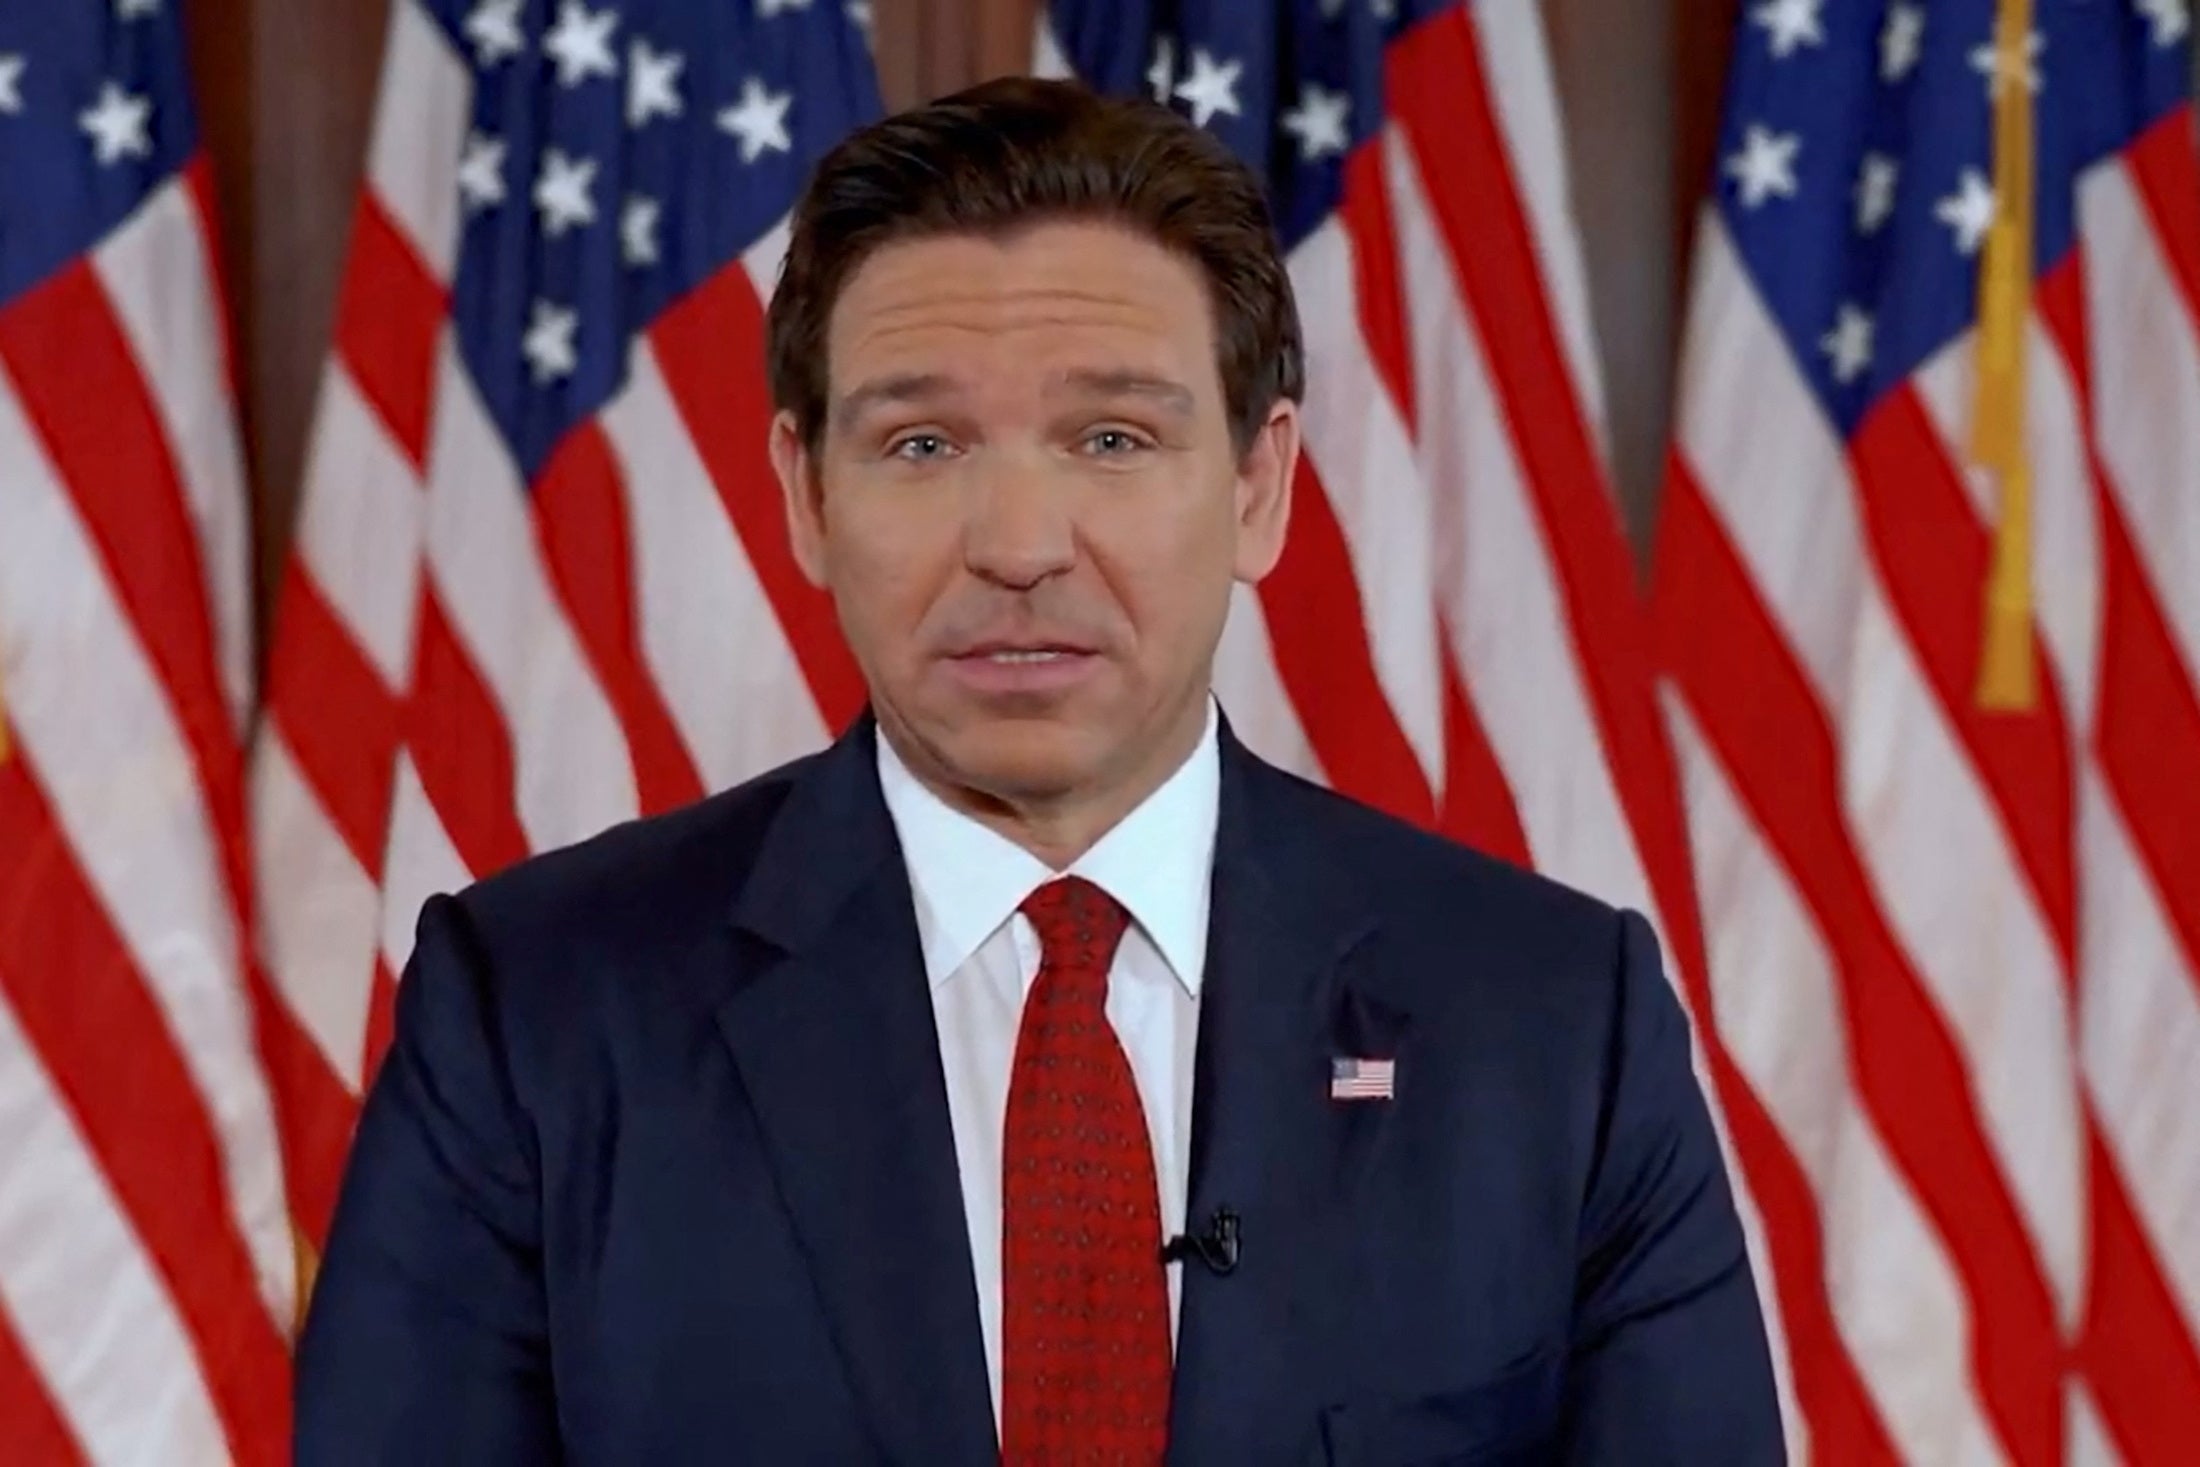 Ron DeSantis suspended his campaign in January